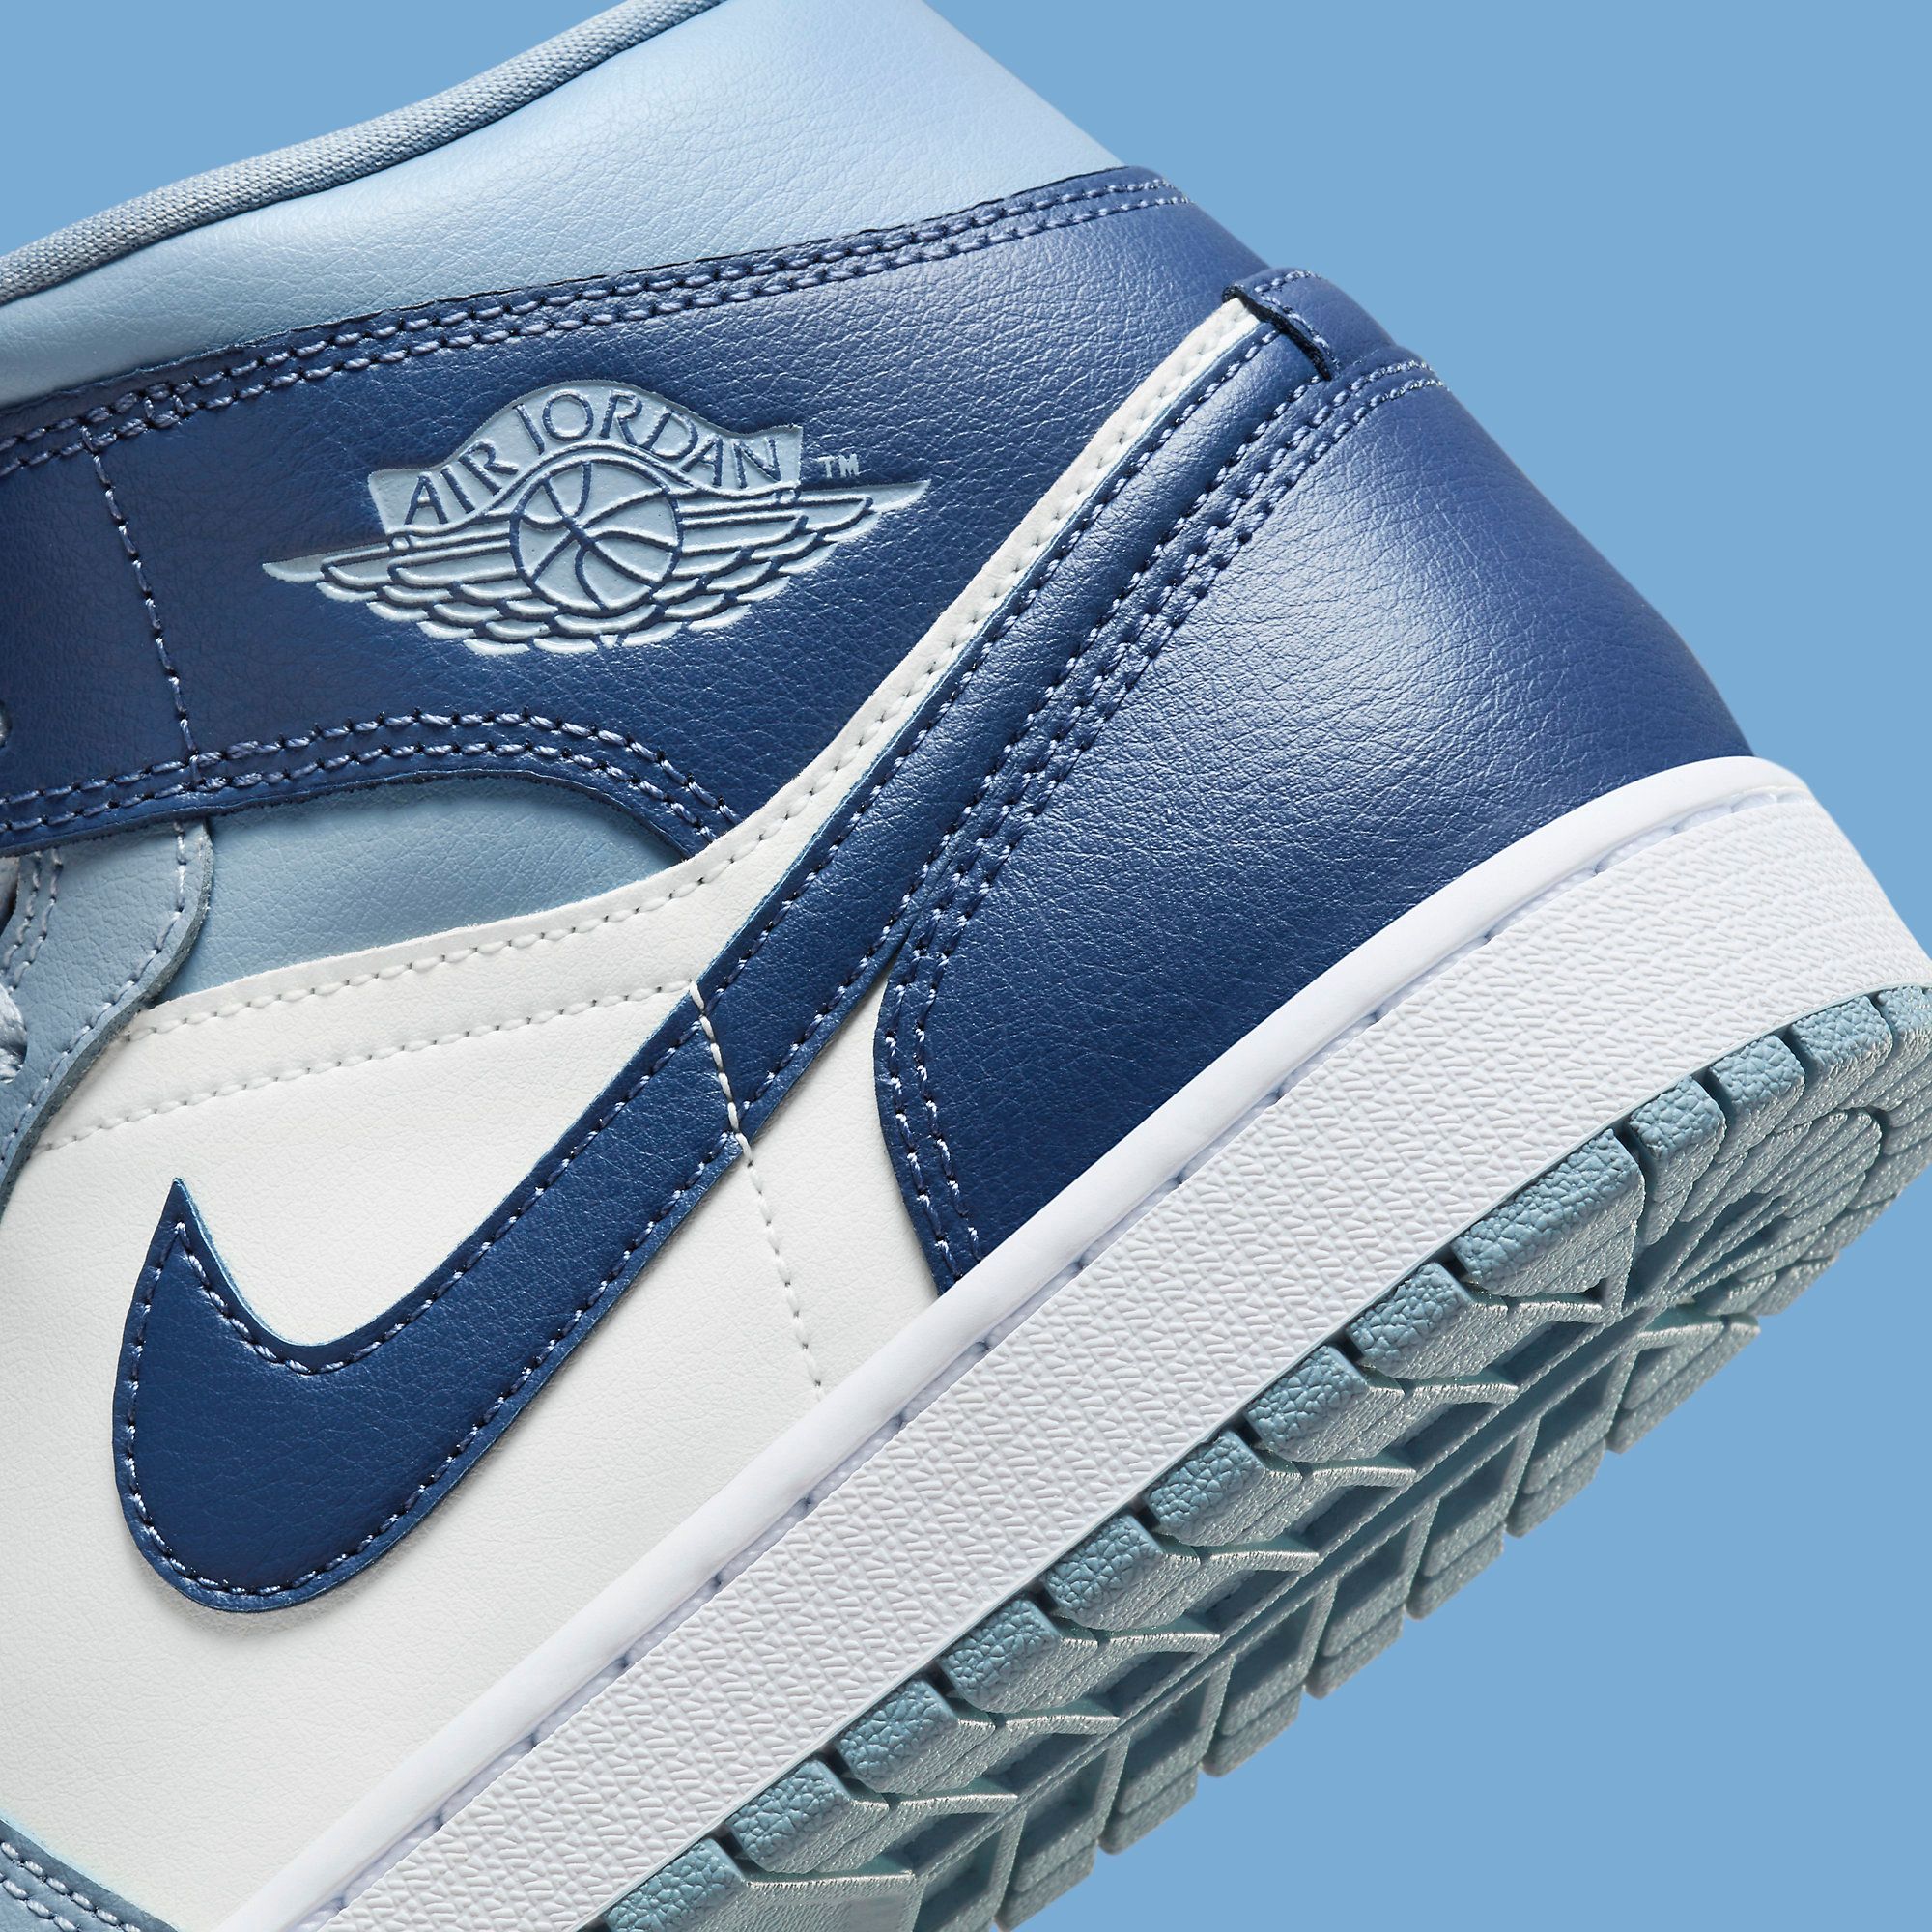 Dual Blue Hues Take Over This New Air Jordan 1 Mid | House of Heat°